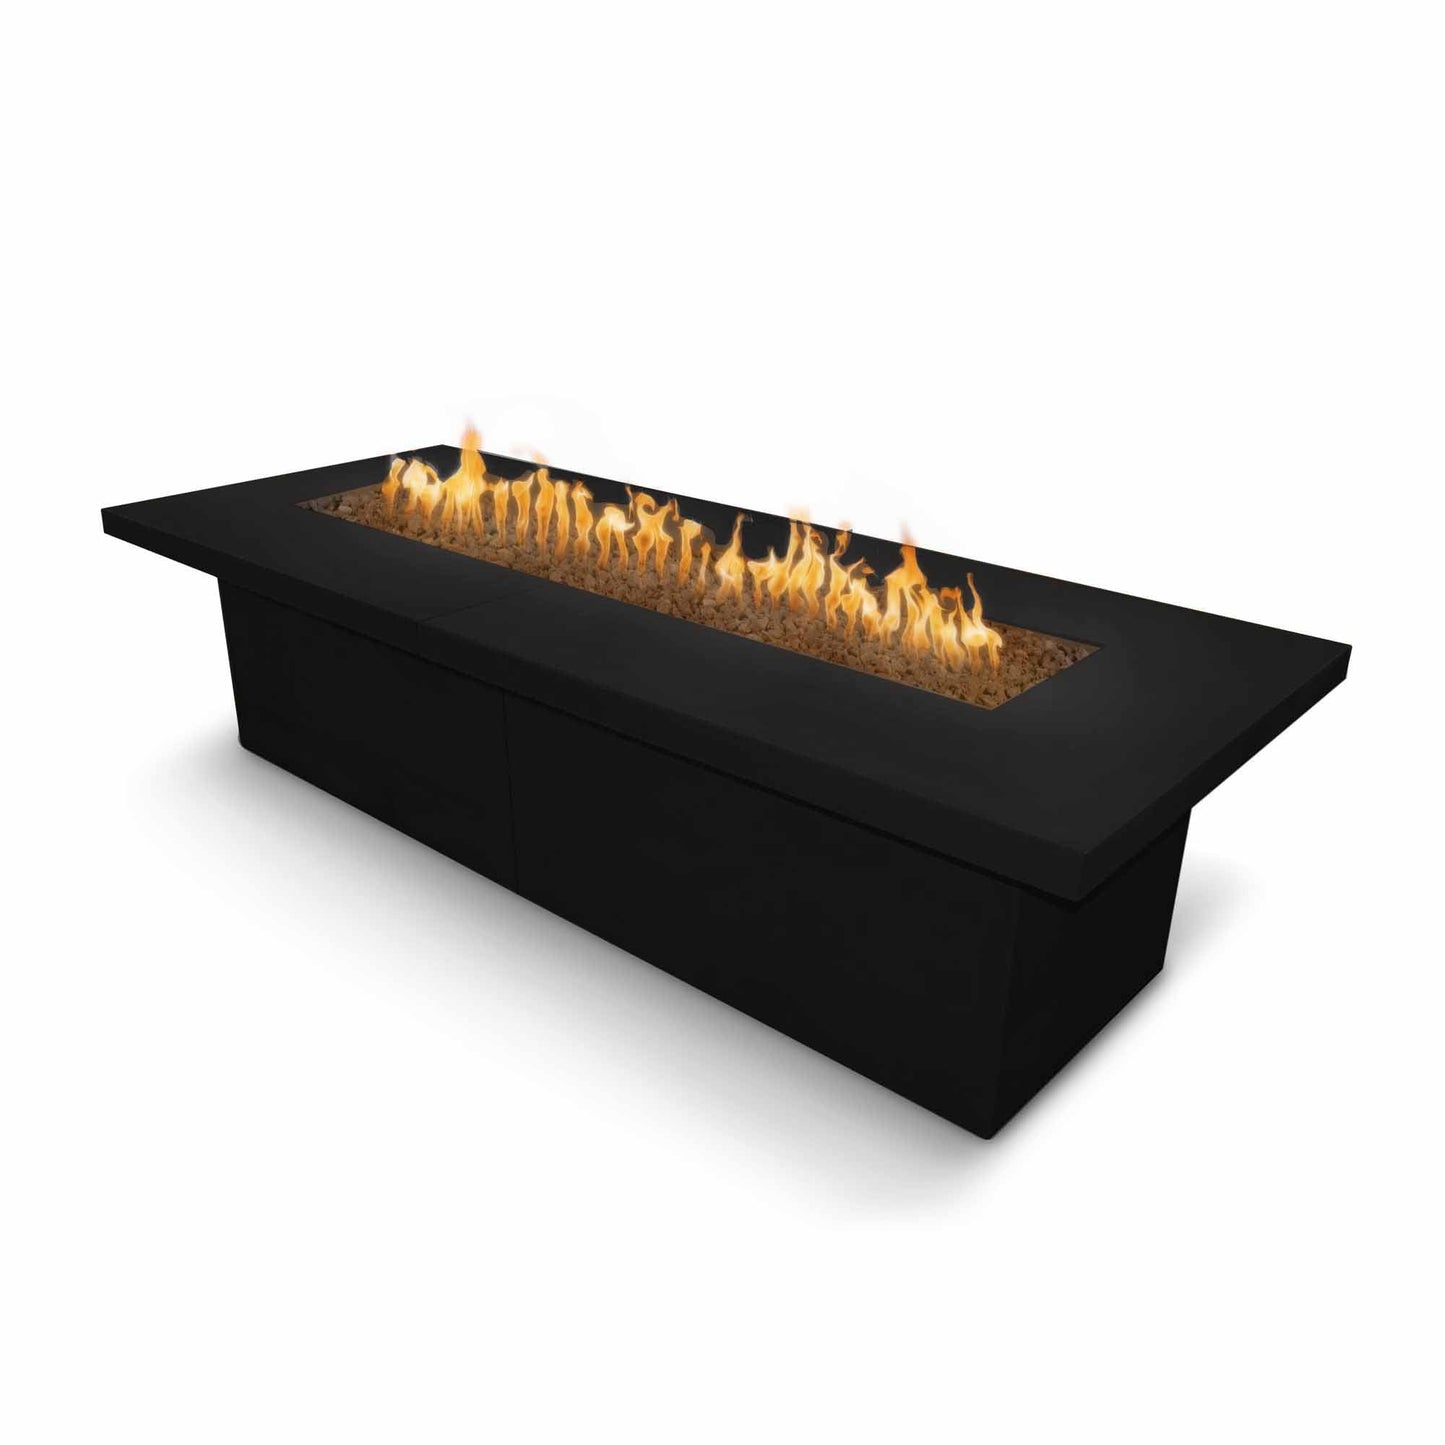 The Outdoor Plus Rectangular Newport 144" Corten Steel Liquid Propane Fire Pit with Match Lit with Flame Sense Ignition